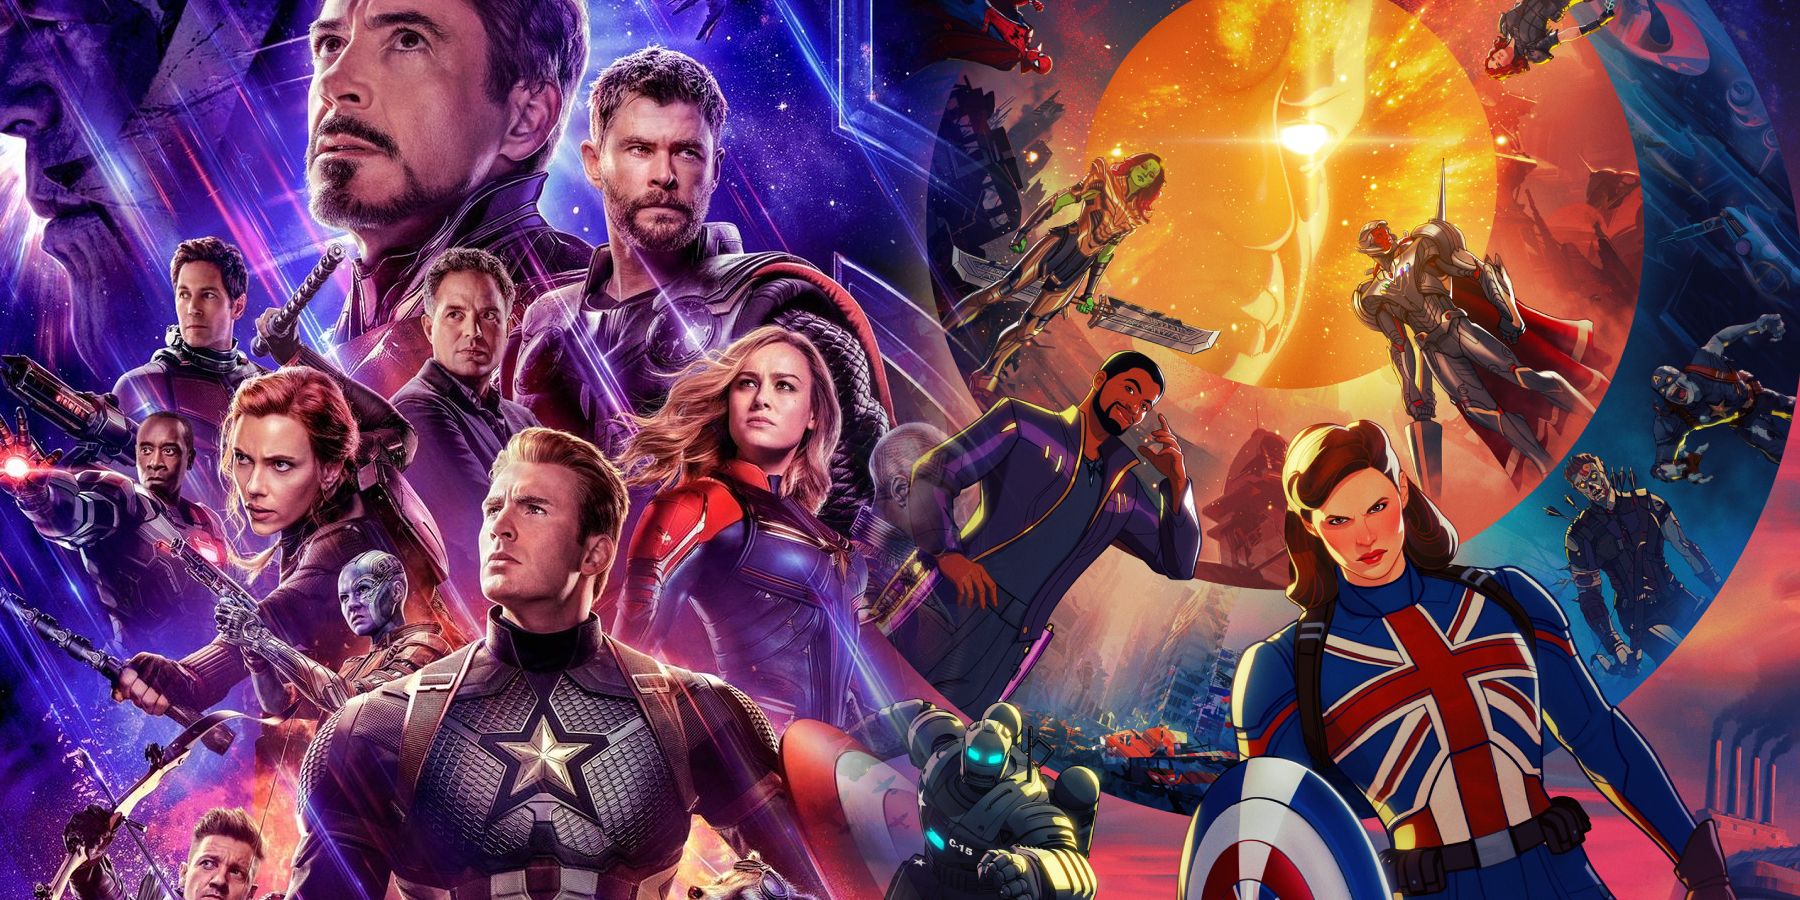 Posters for Marvel's What If...? and Avengers Endgame